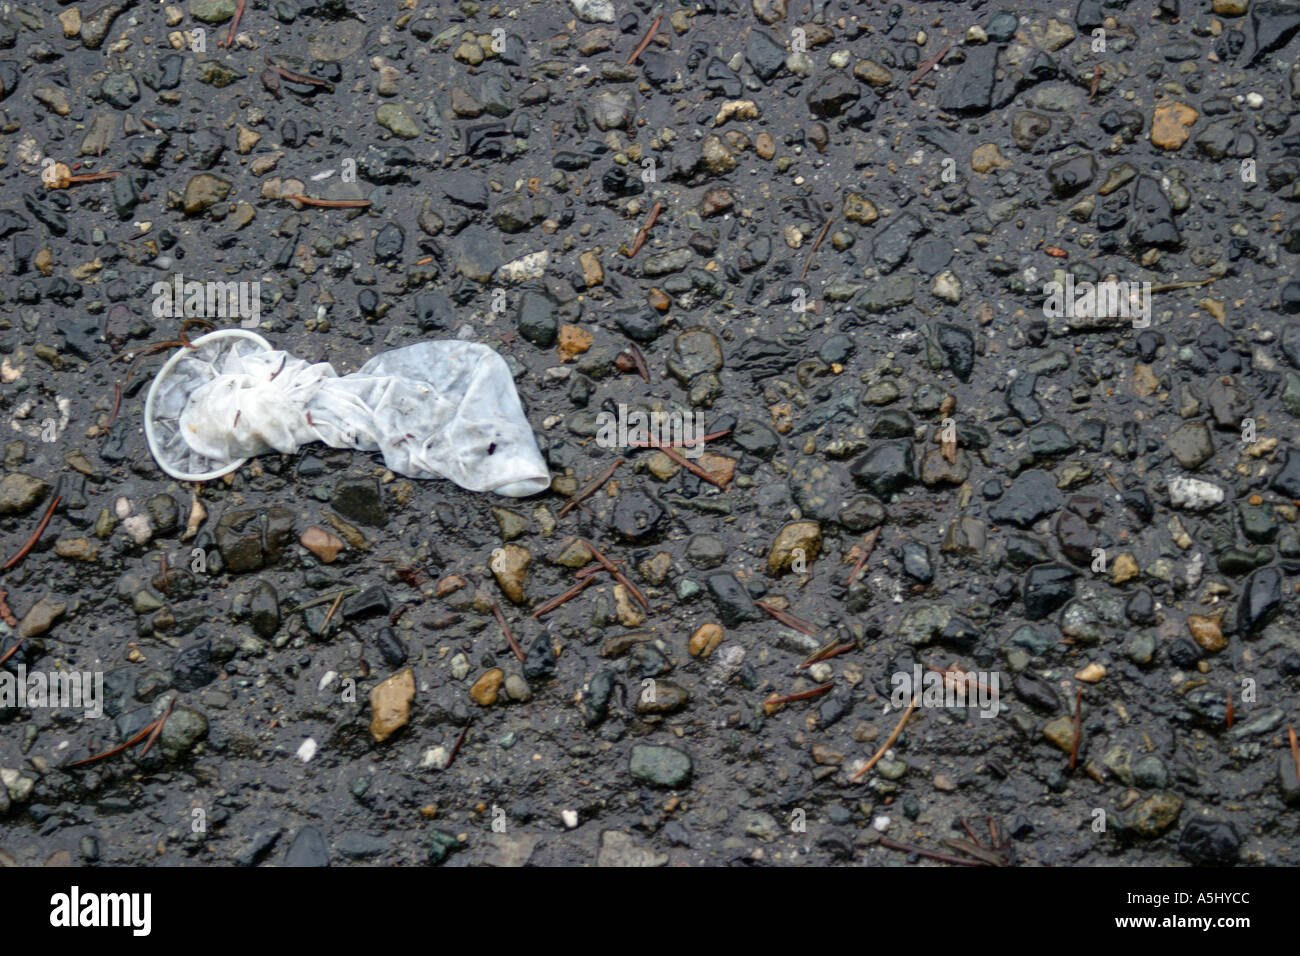 discarded used condom on roadside Stock Photo